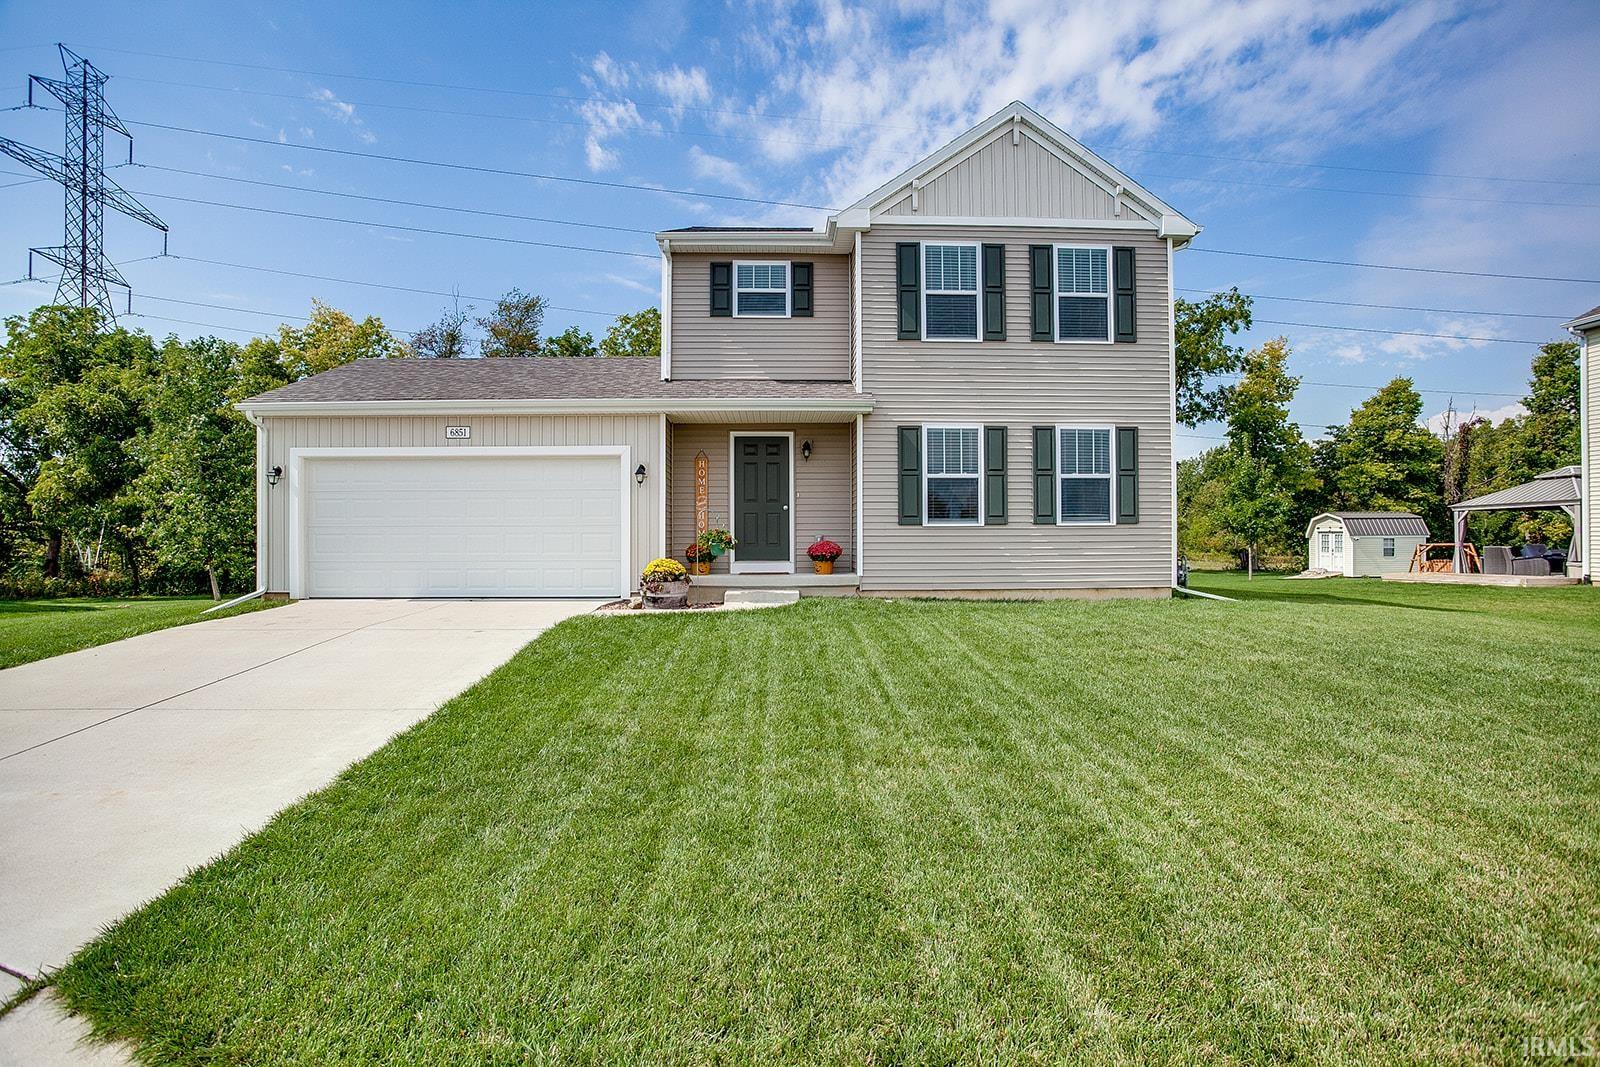 6851 Mackey Court, South Bend, IN 46614